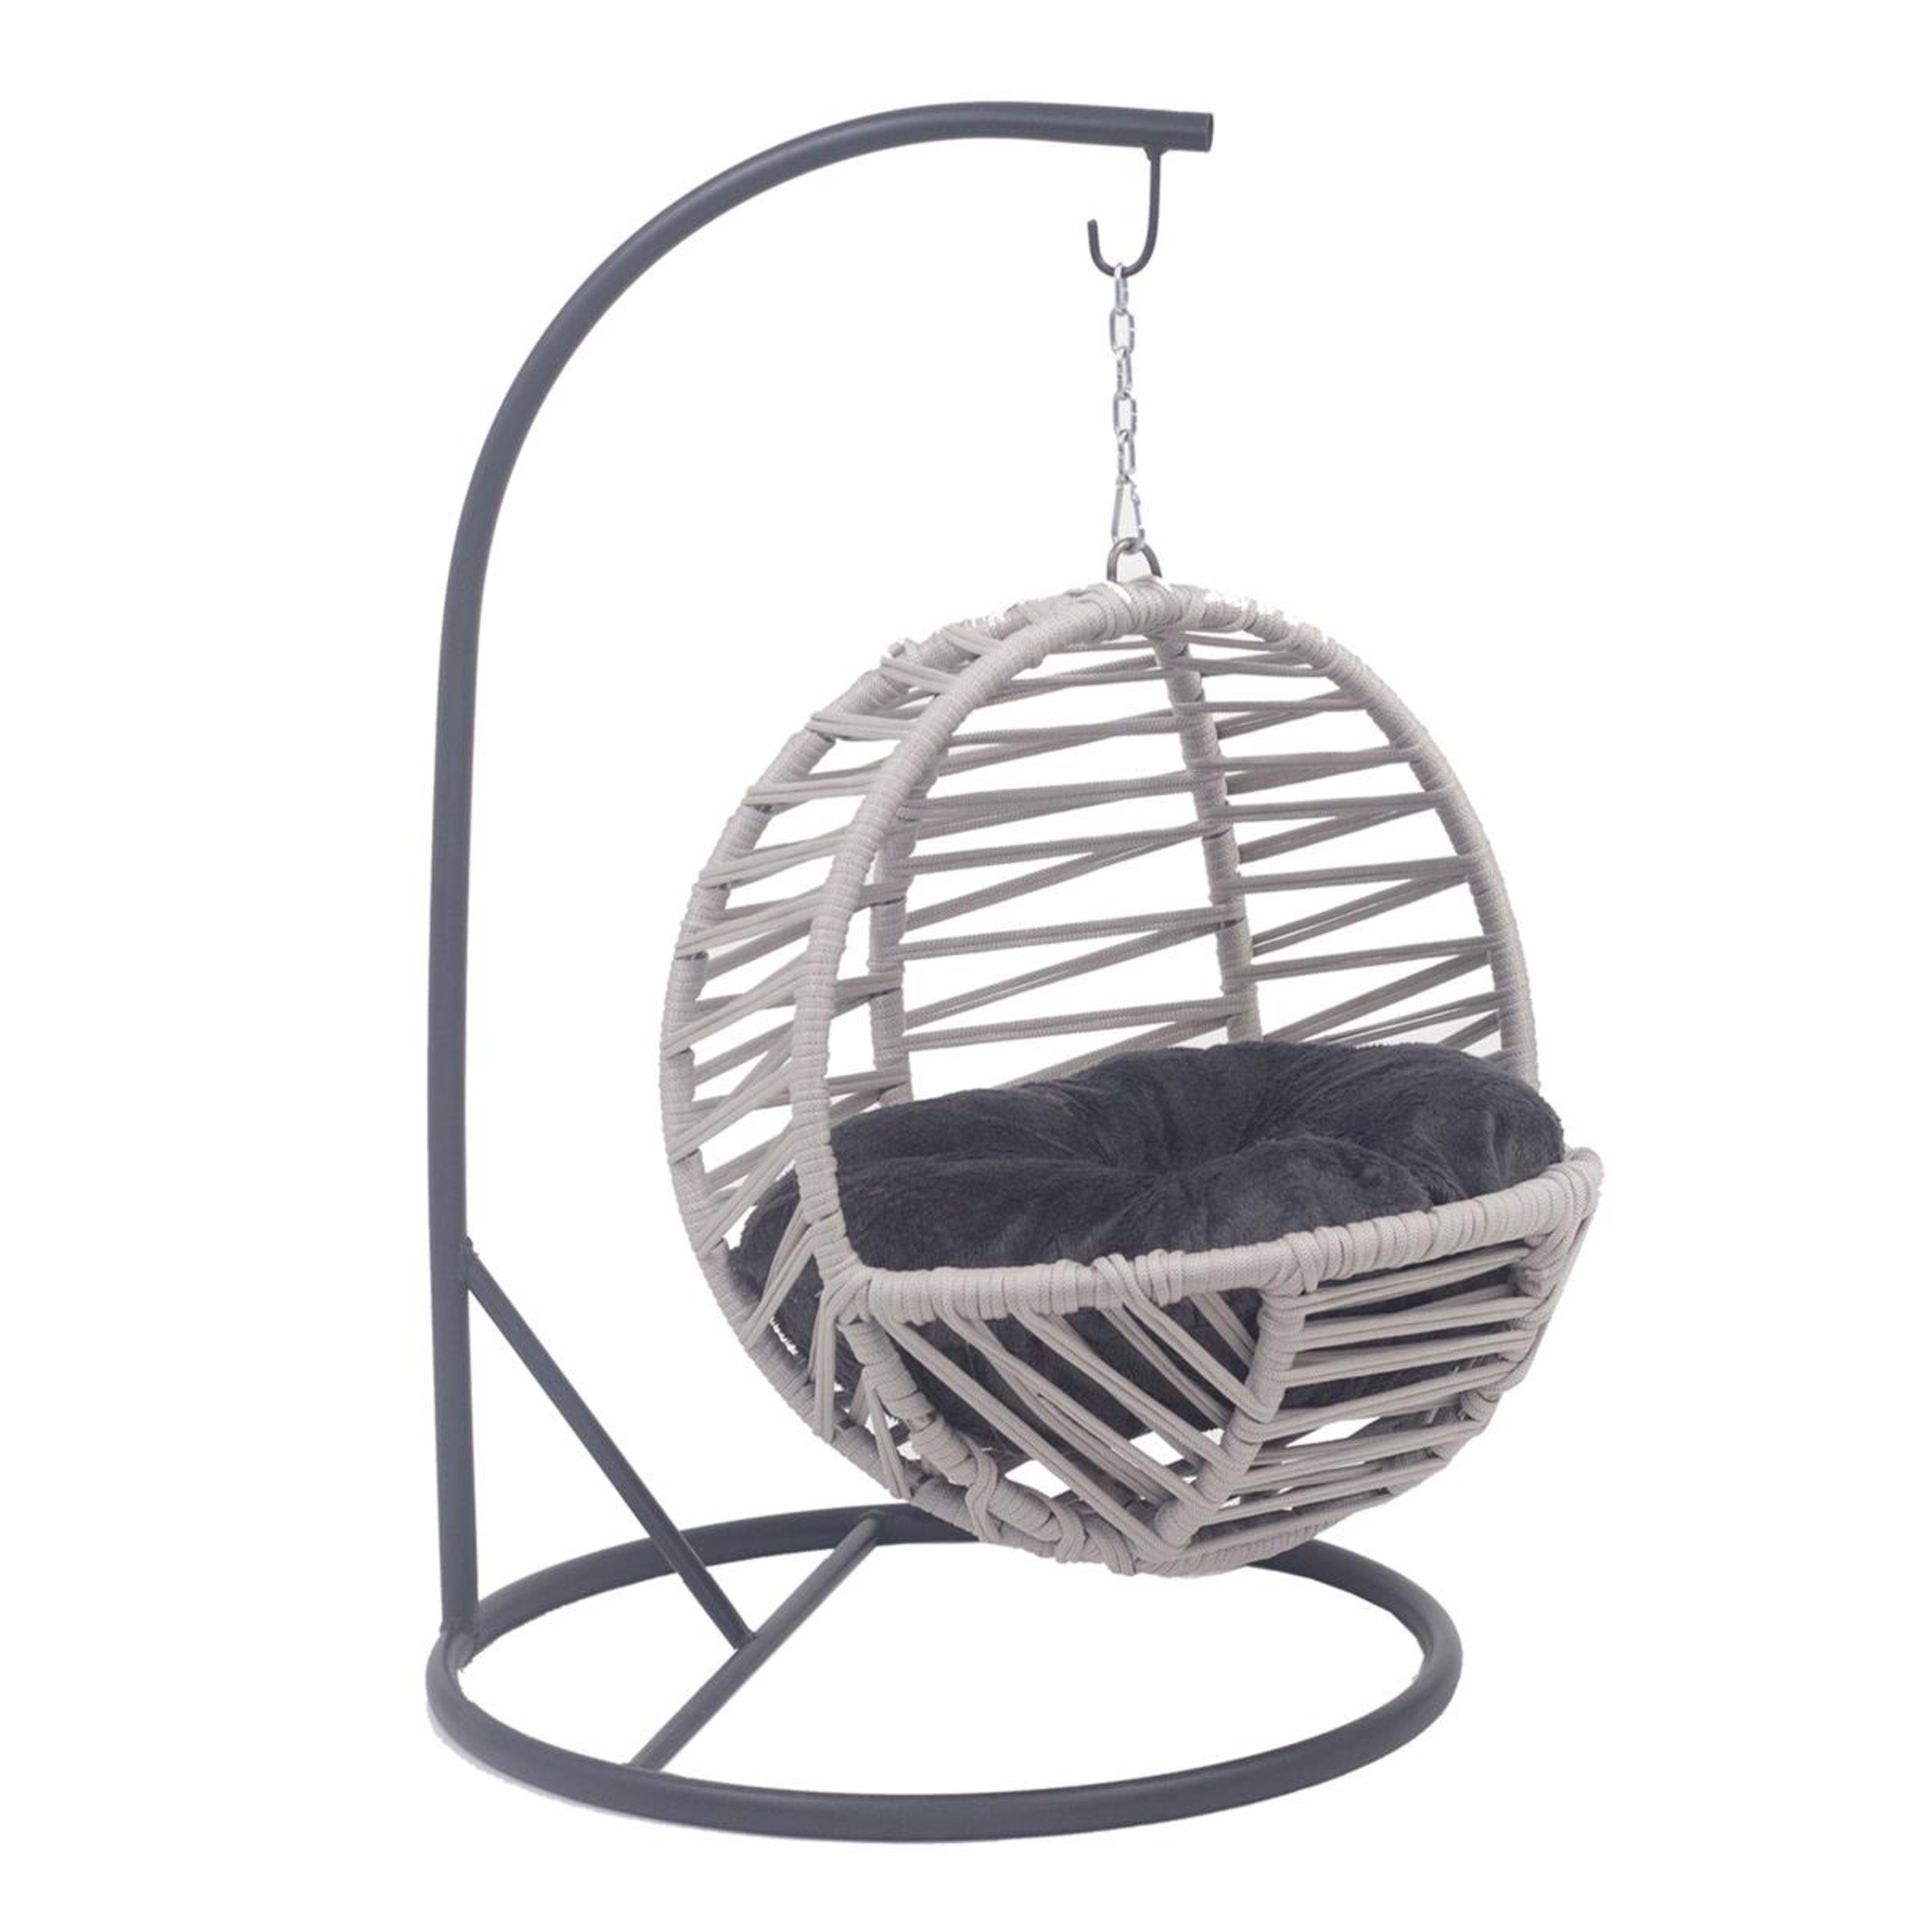 + VAT Brand New SRP £49.99 The Chelsea Garden Co Special Edition Pet Swing Chair/Bed - Light